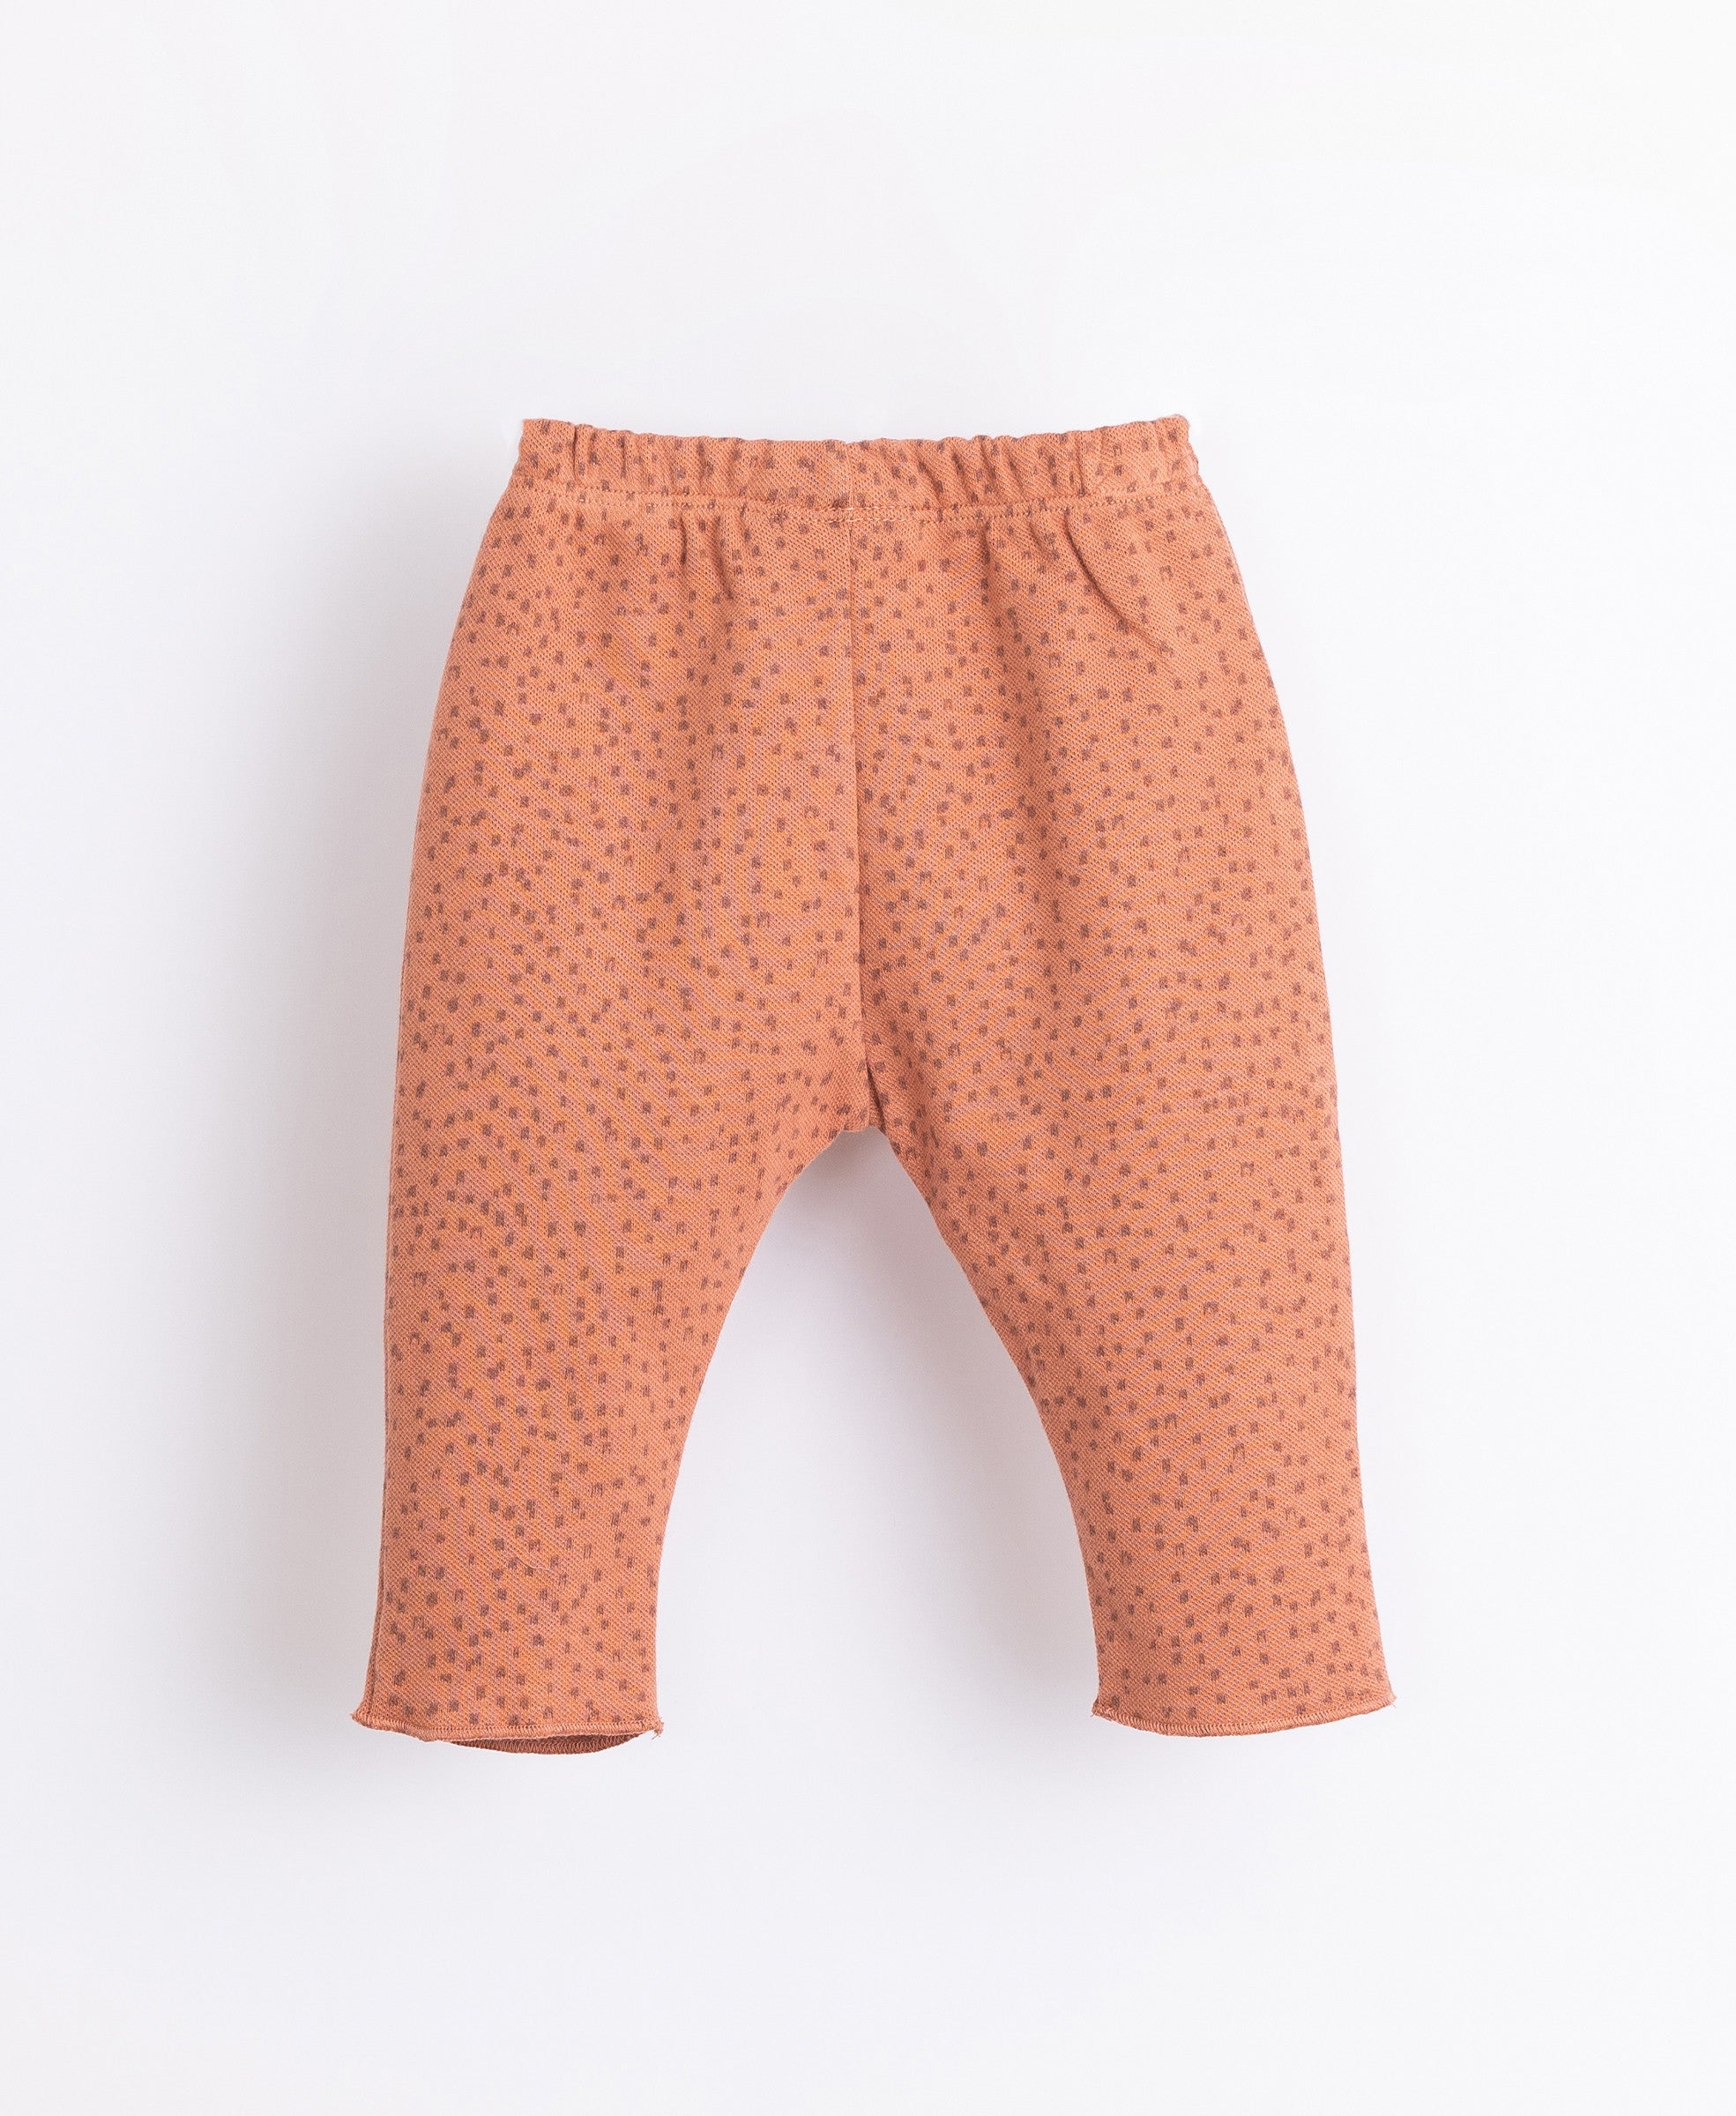 Pants with pattern and decorative buttons